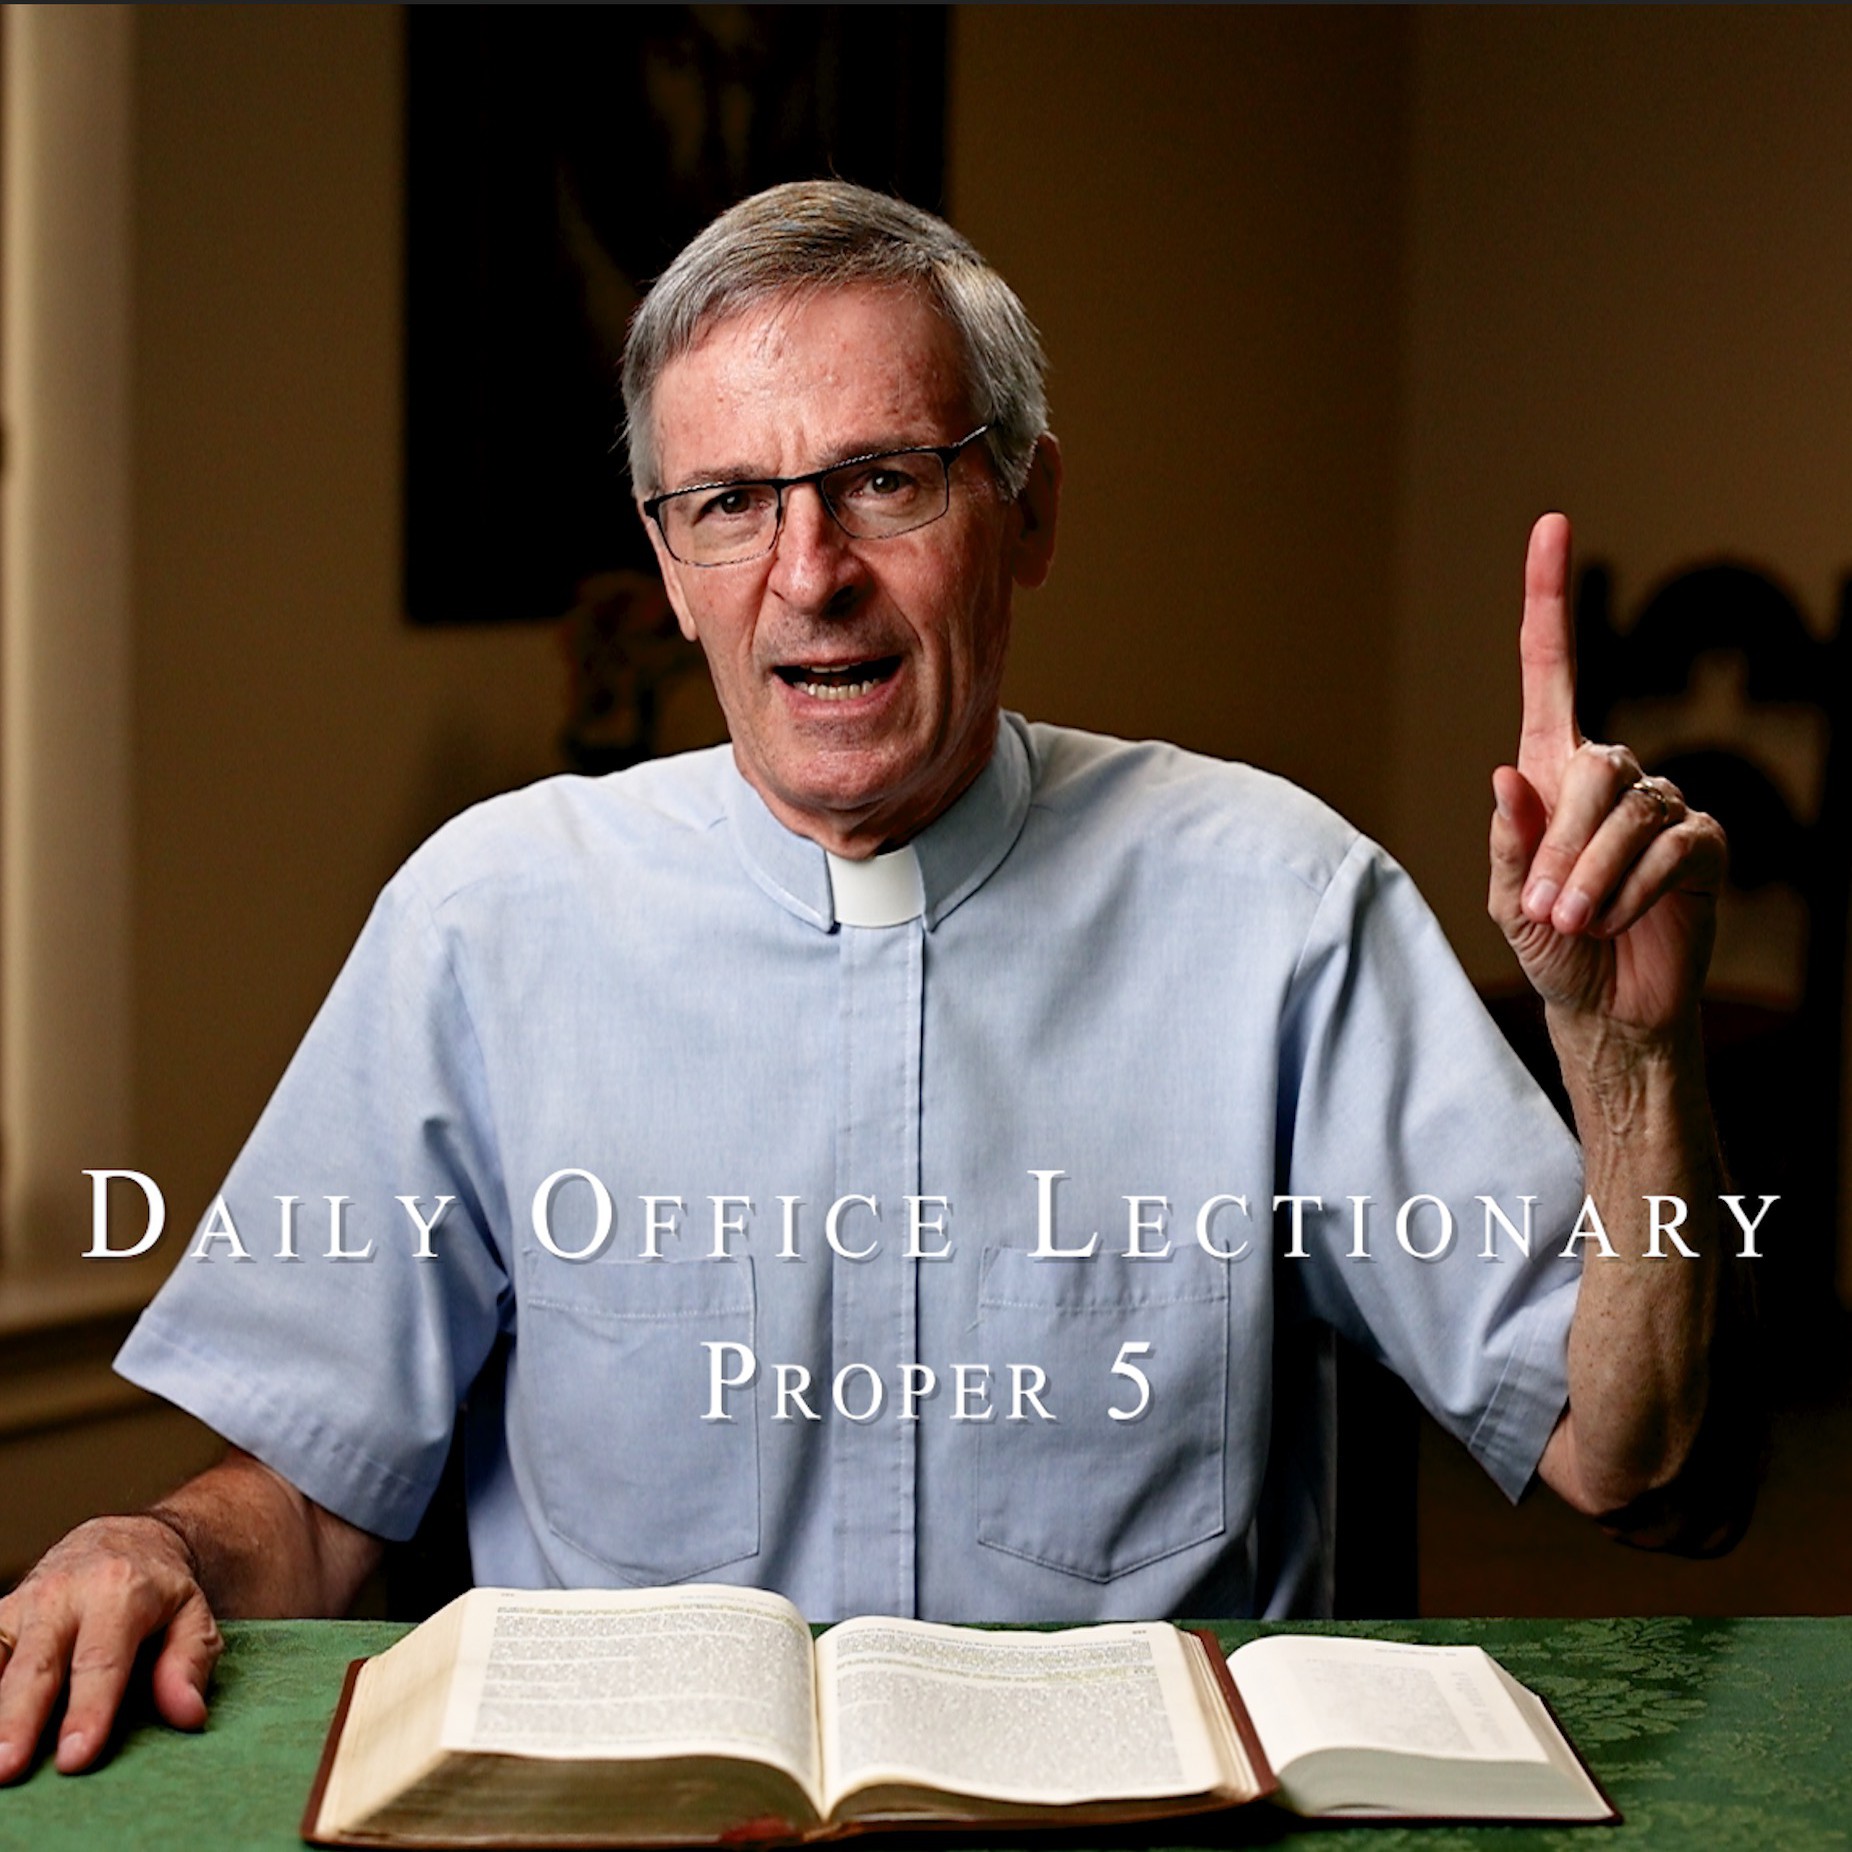 The Daily Office Lectionary with Father Reid